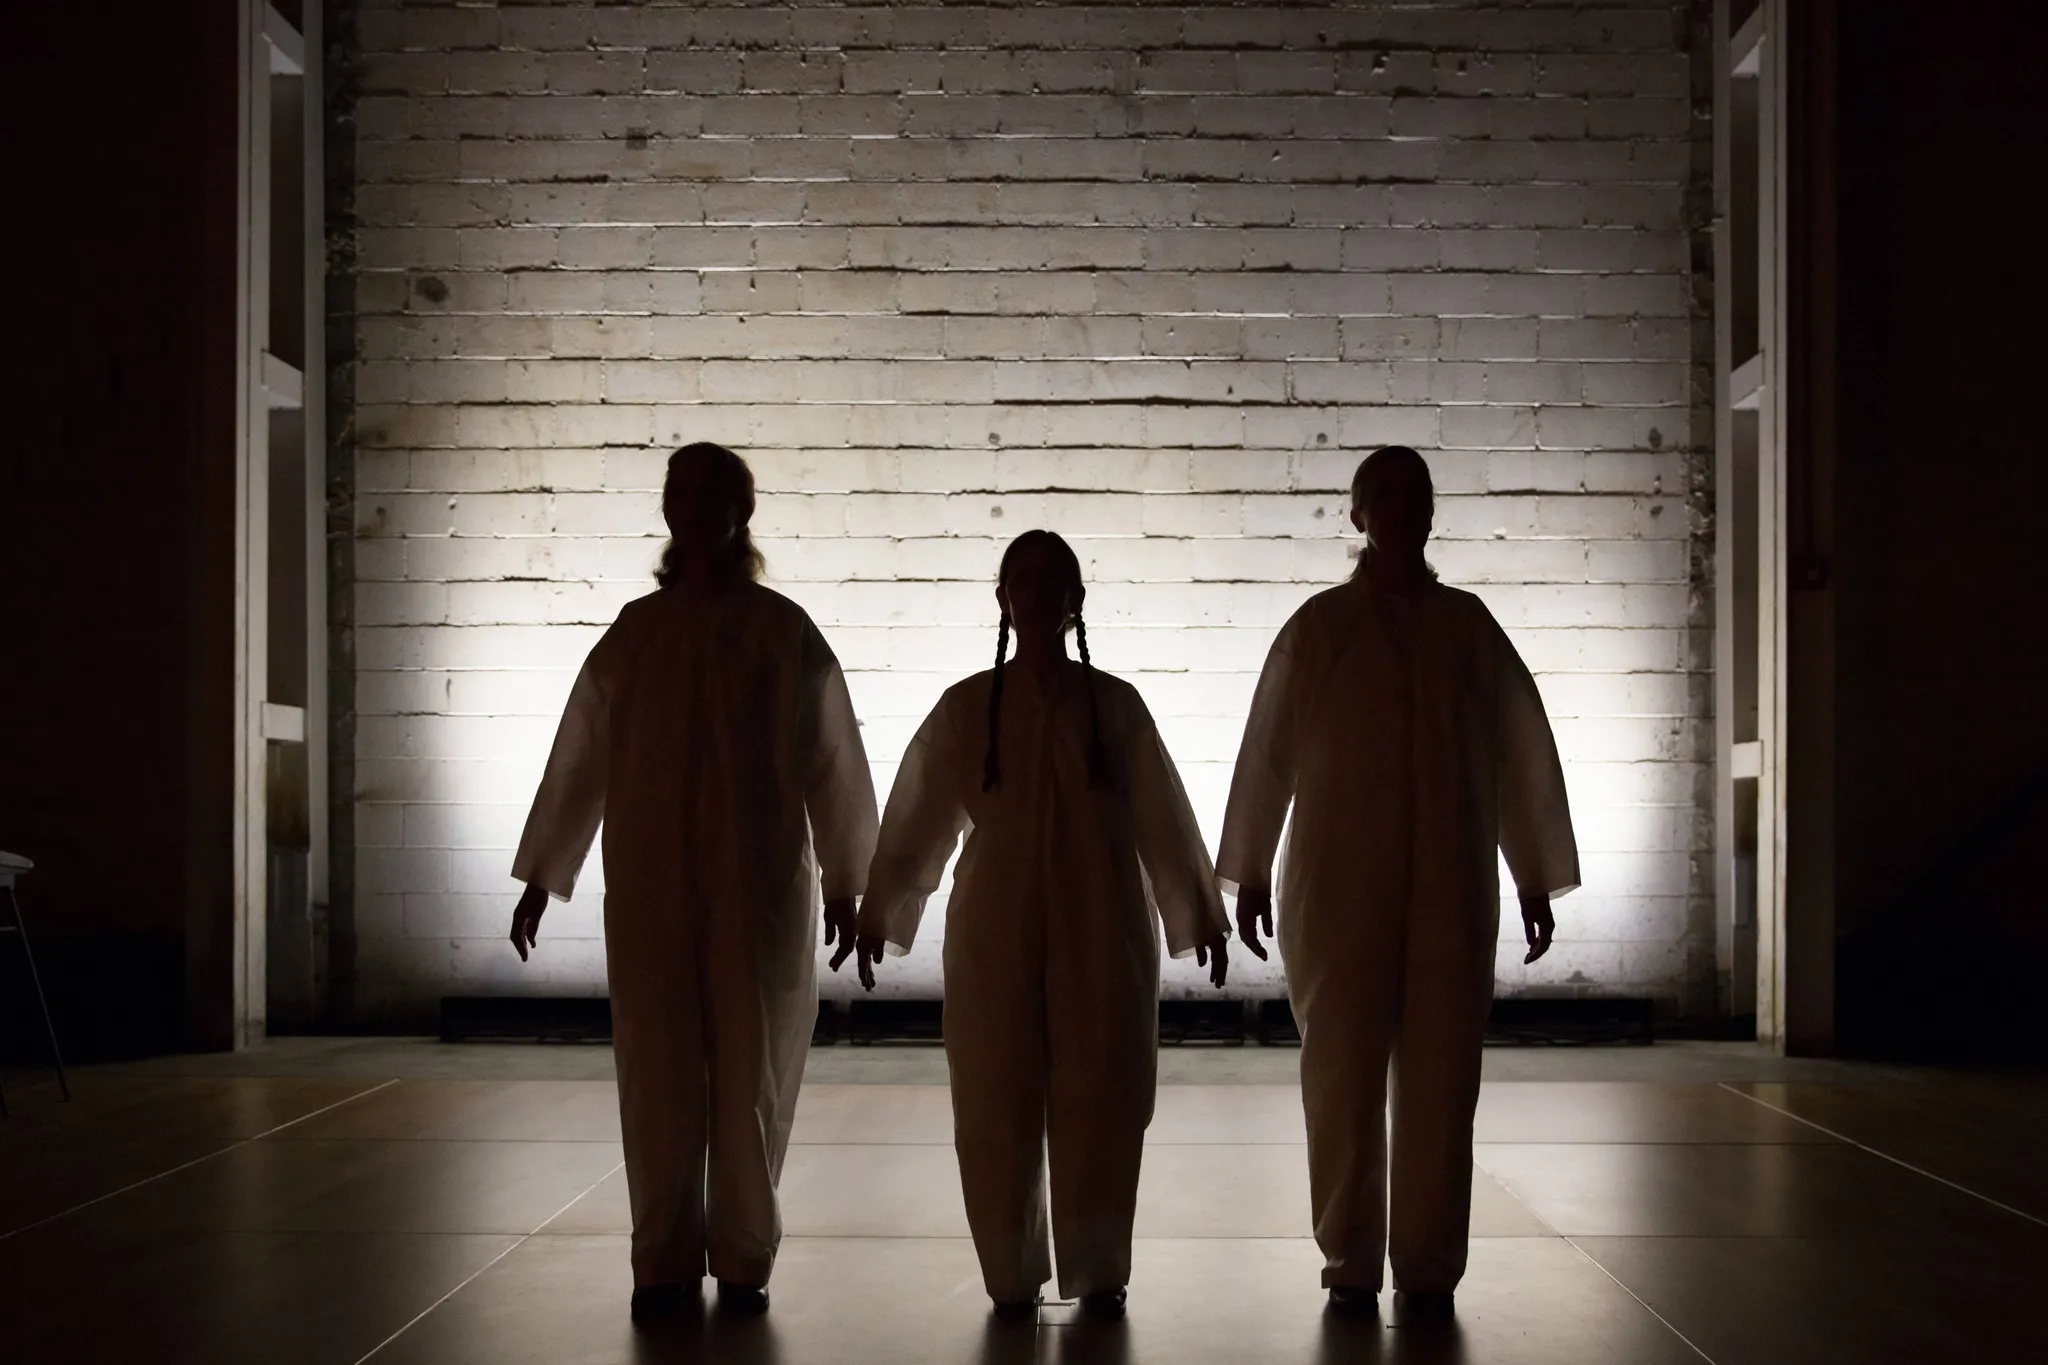 Backlit photograph with 3 silhouettes in white onesies in front of a white bricked wall